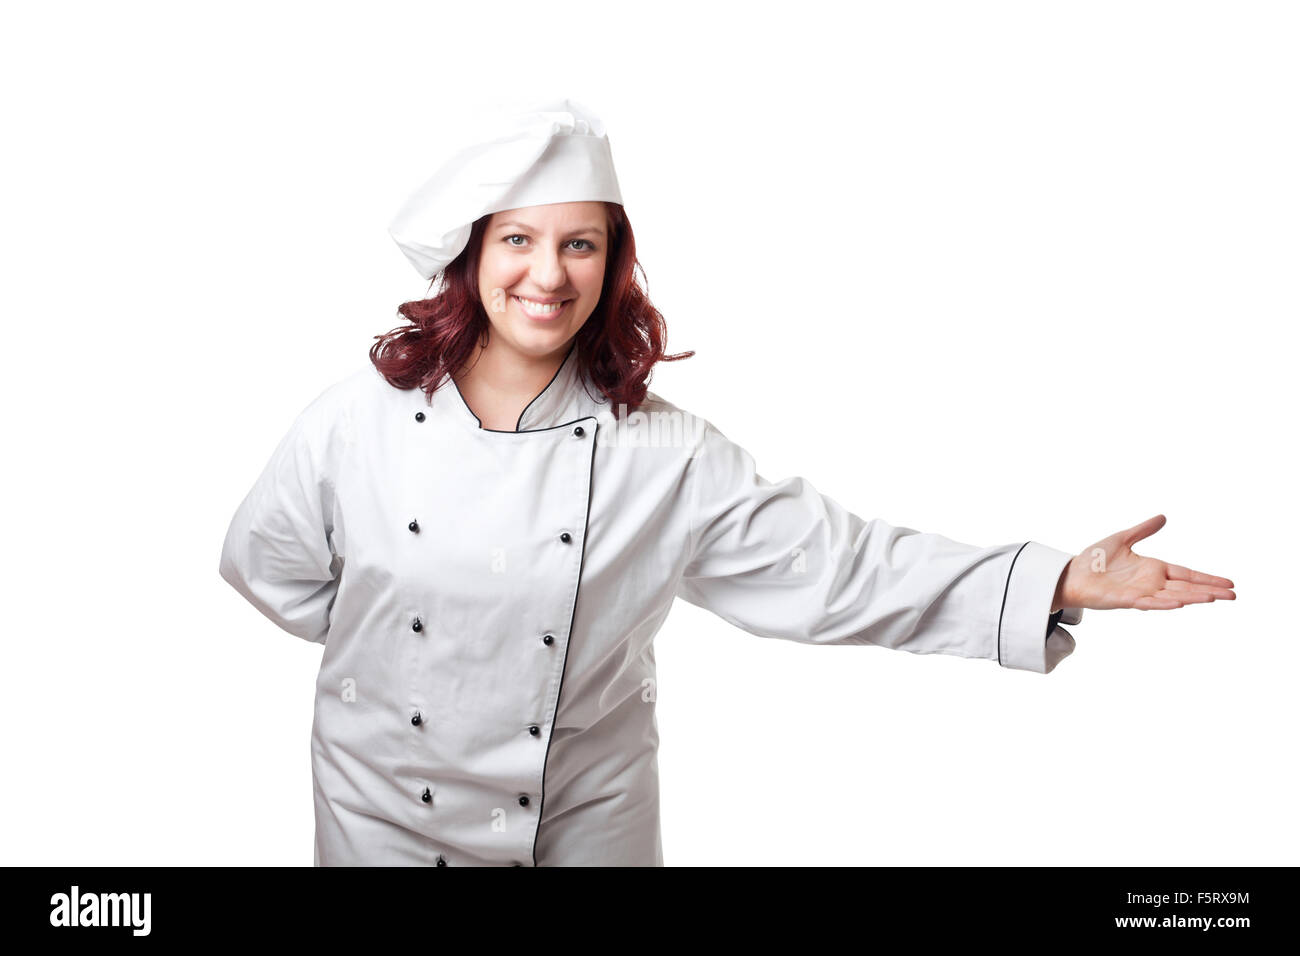 smiling woman chef isolated on white Stock Photo